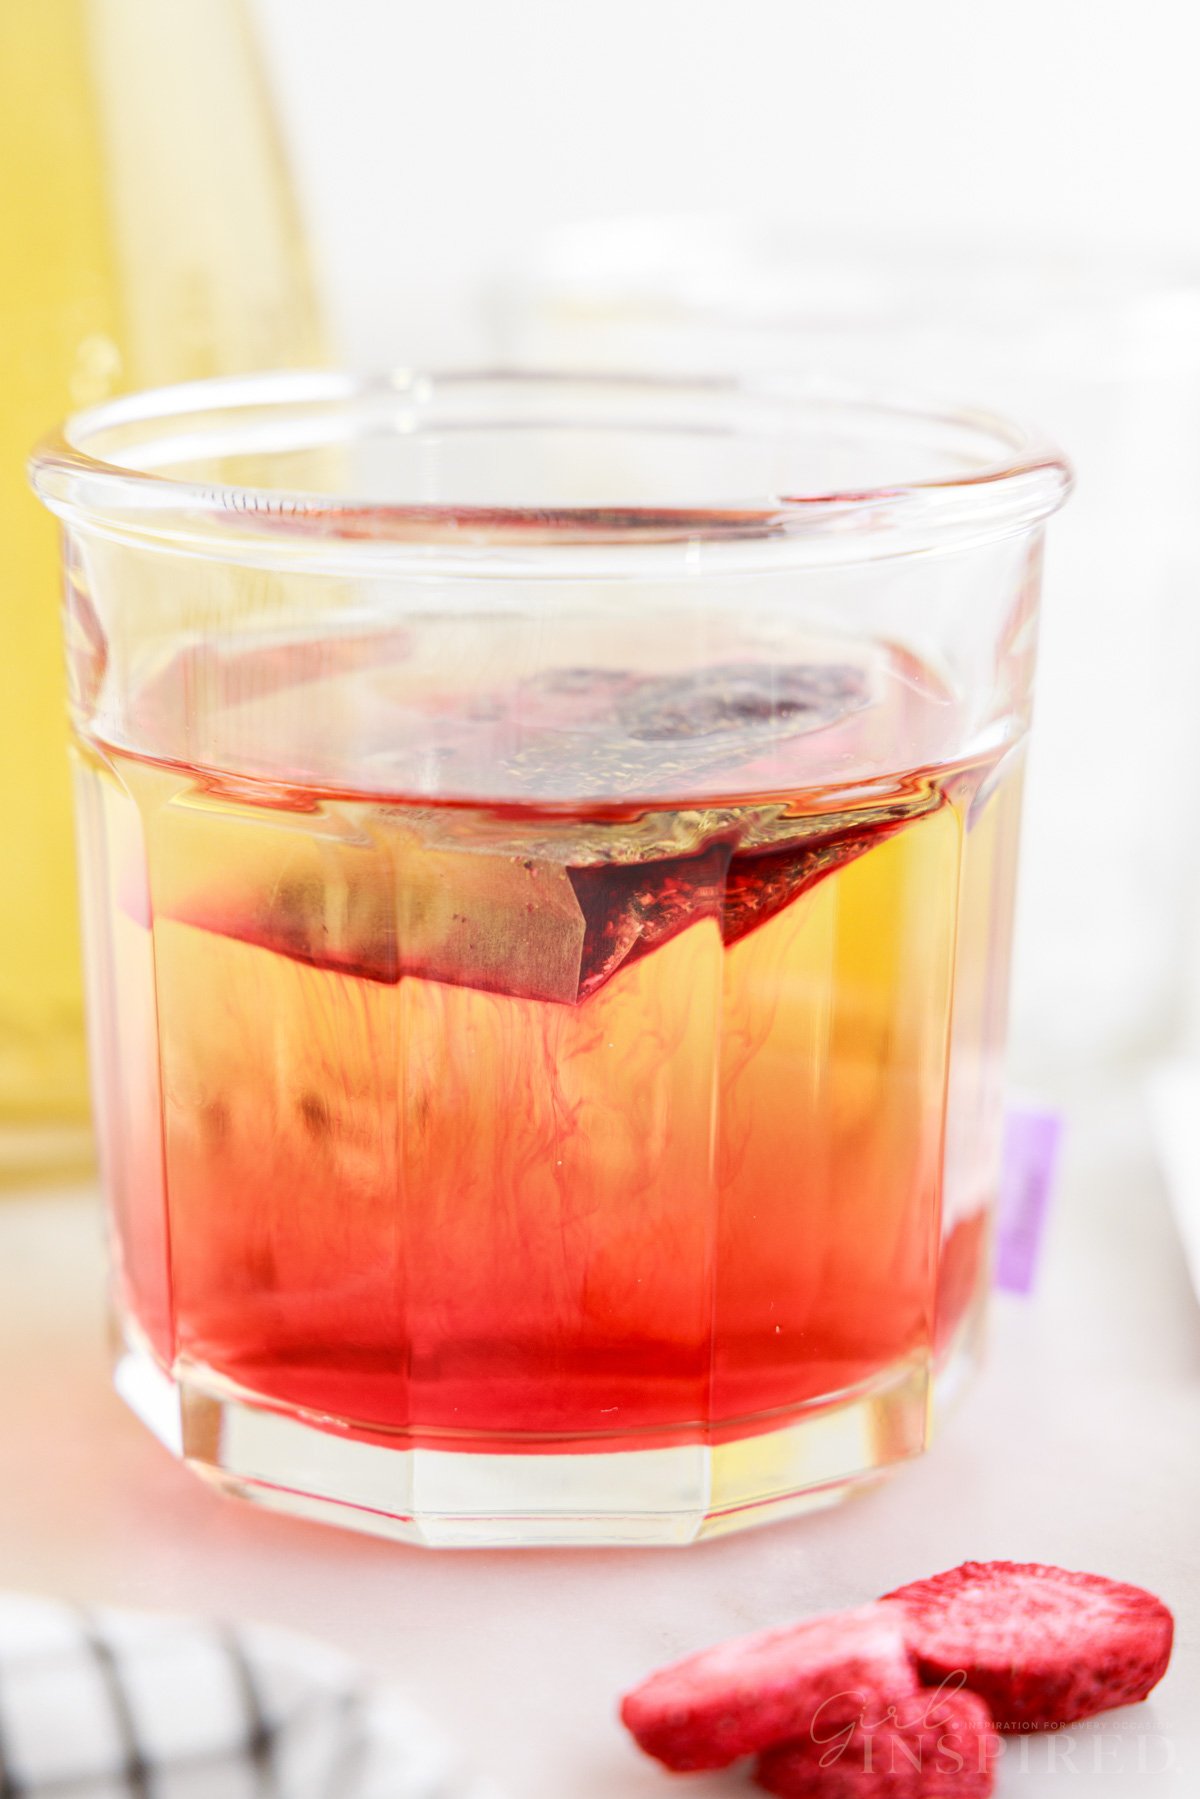 Bright pink tea seeping into the yellow-hued white grape juice in a cup.